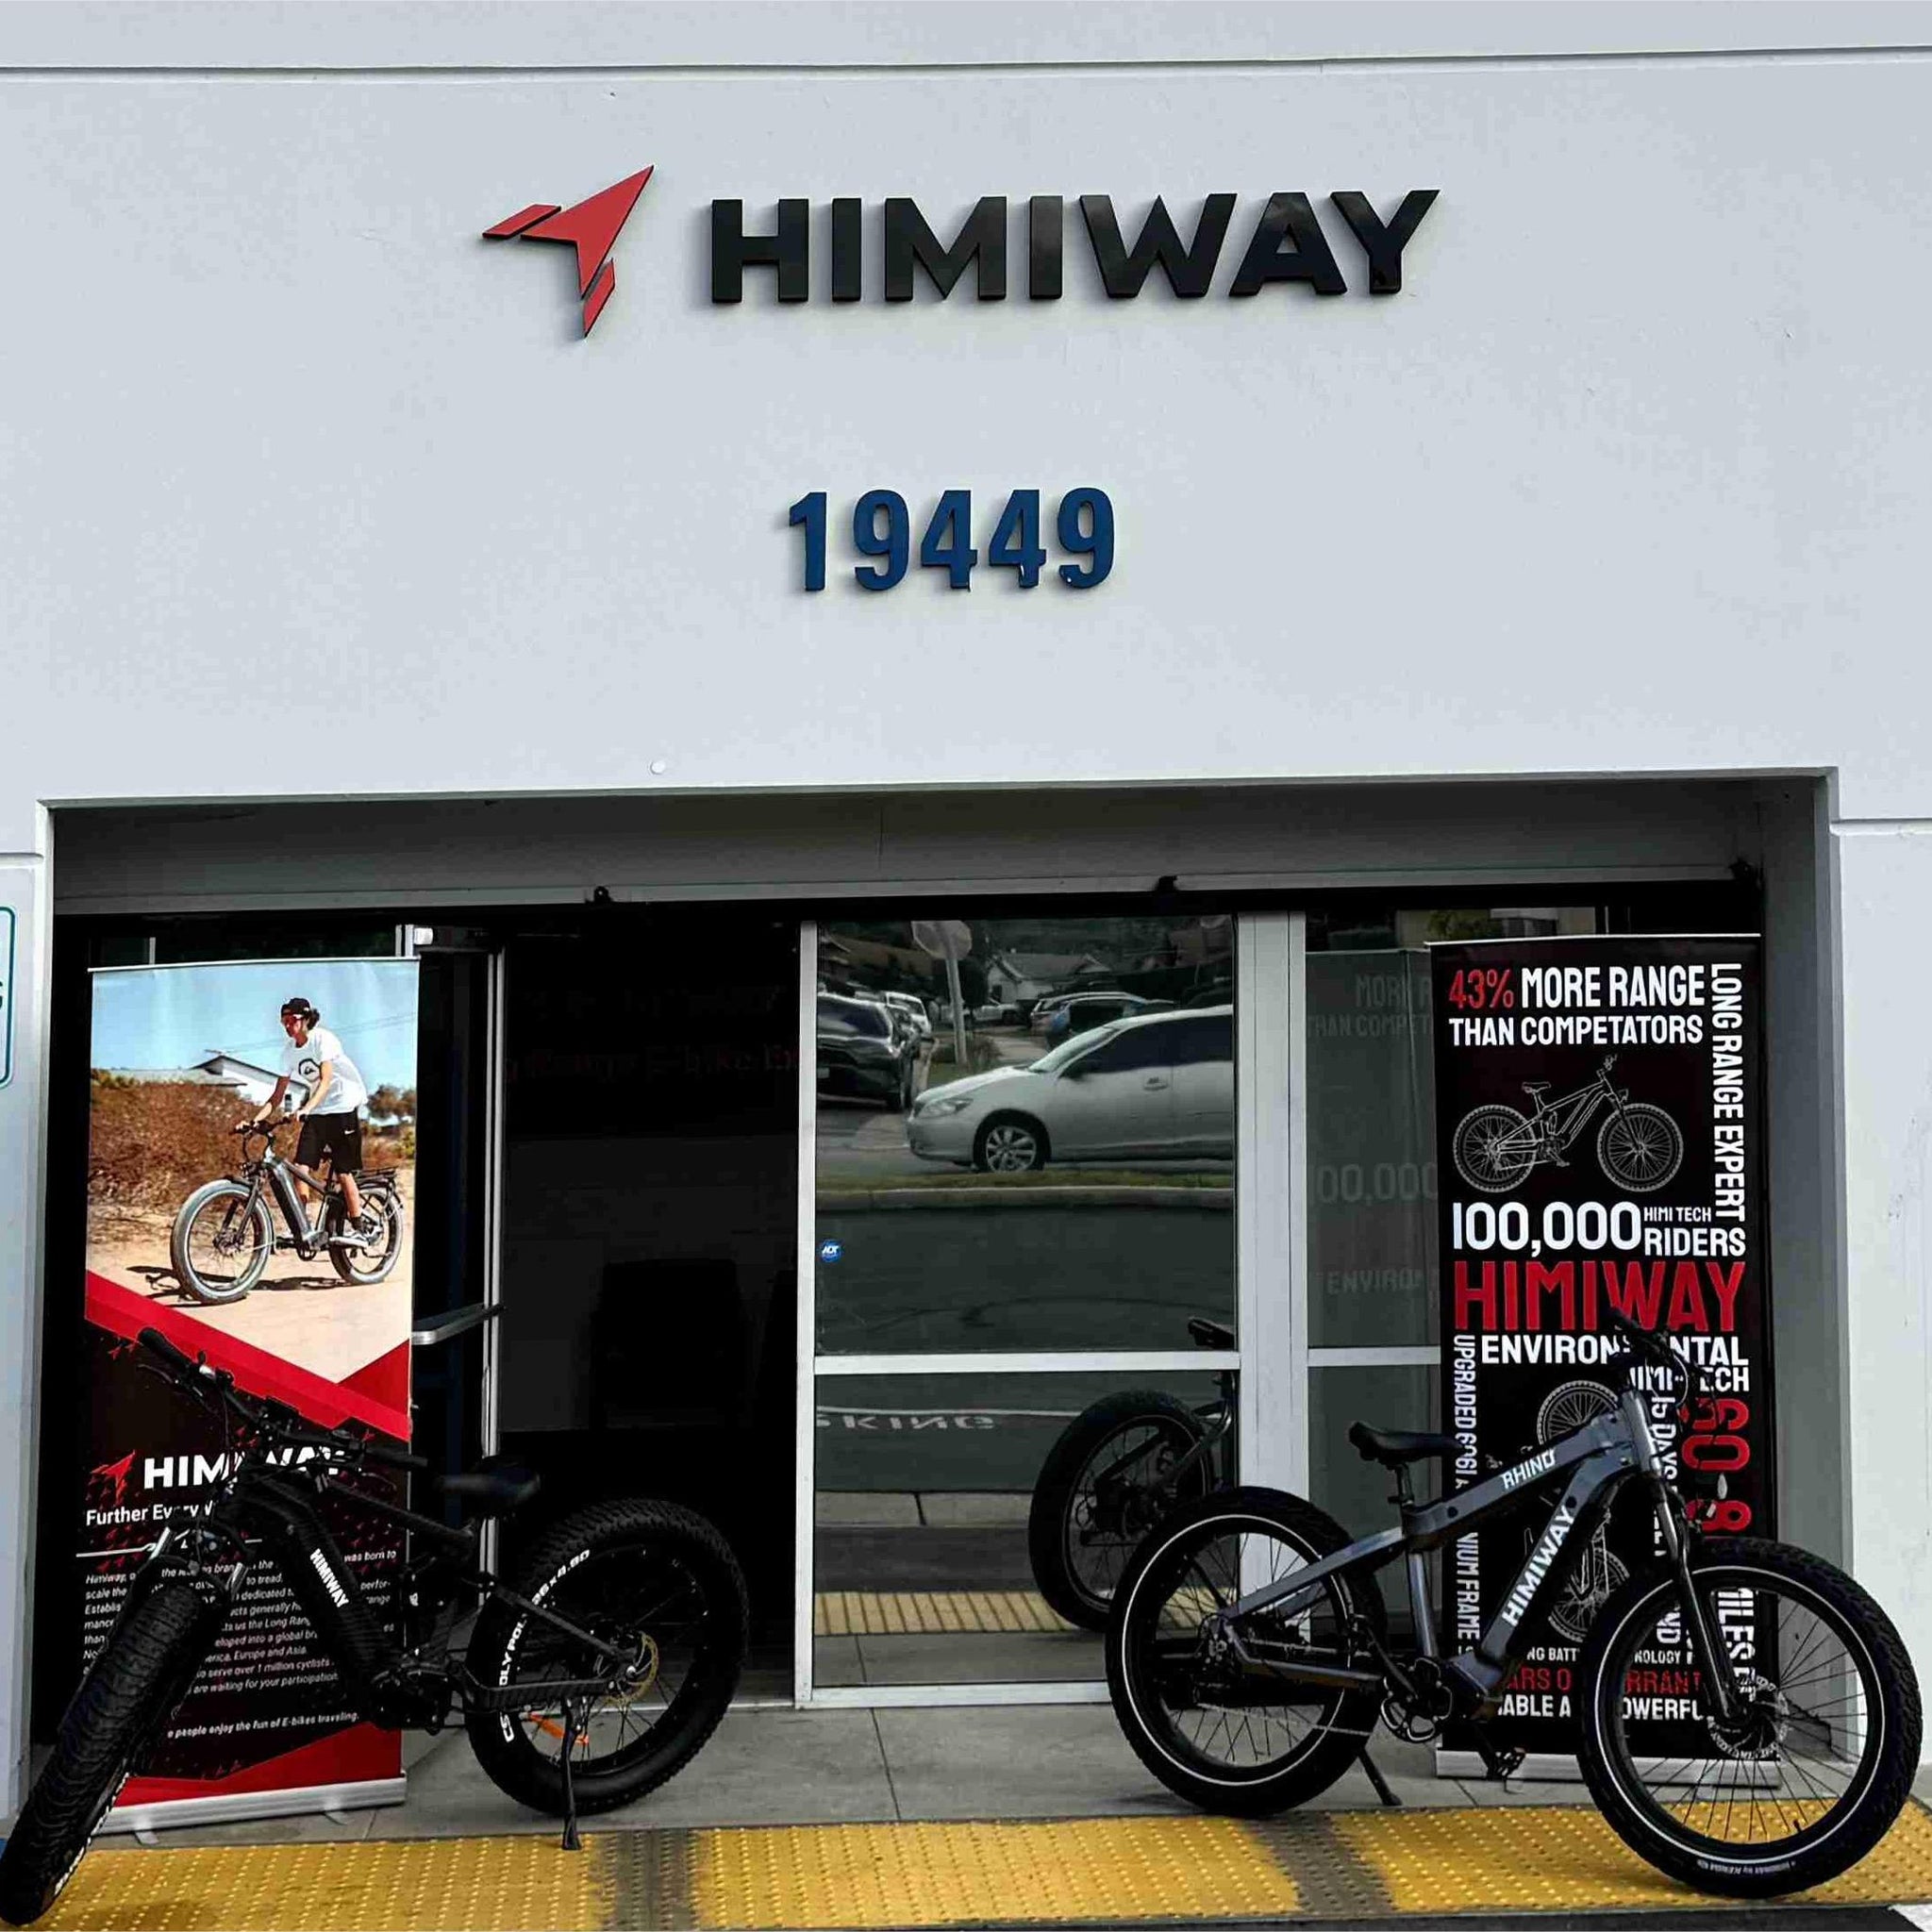  Himiway Official Service Center